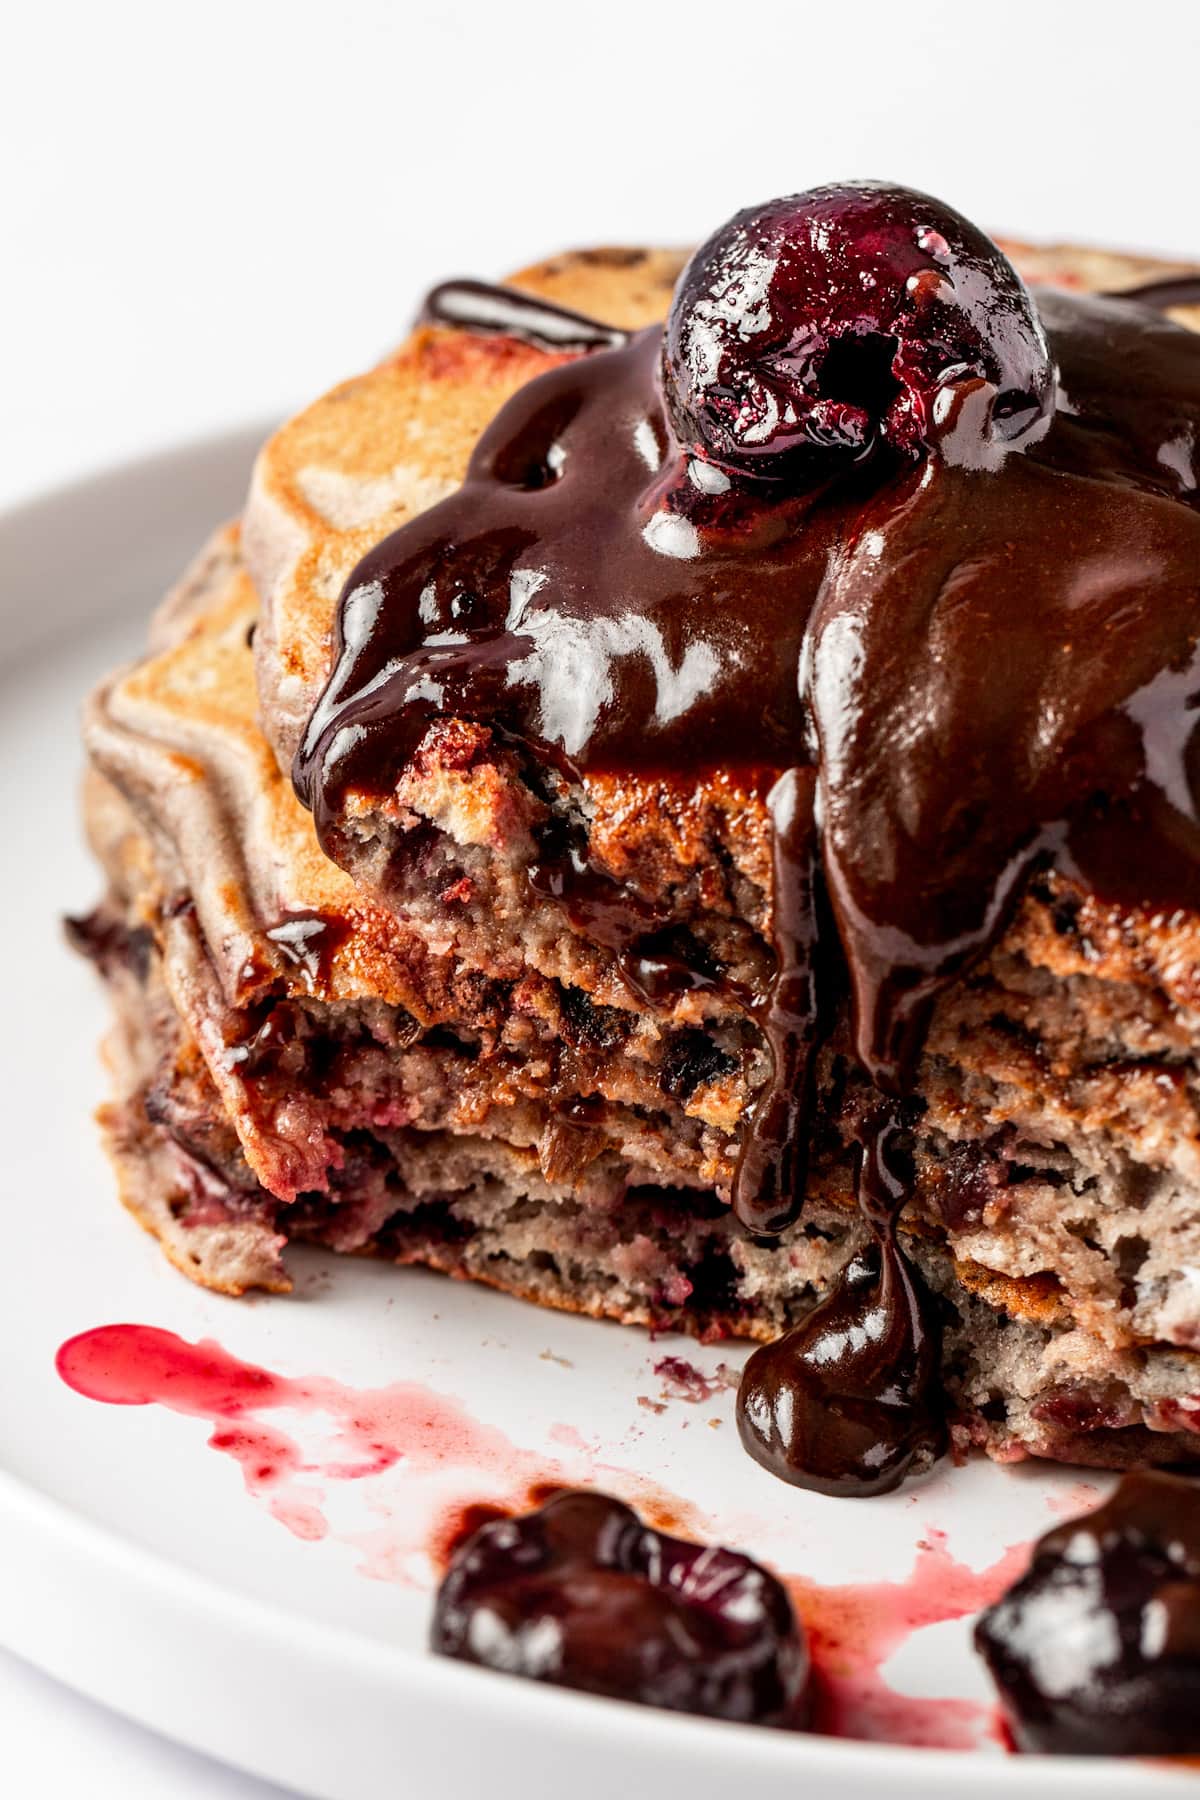 A stack of cherry pancakes with a bite missing, topped with chocolate sauce and a fresh cherry.